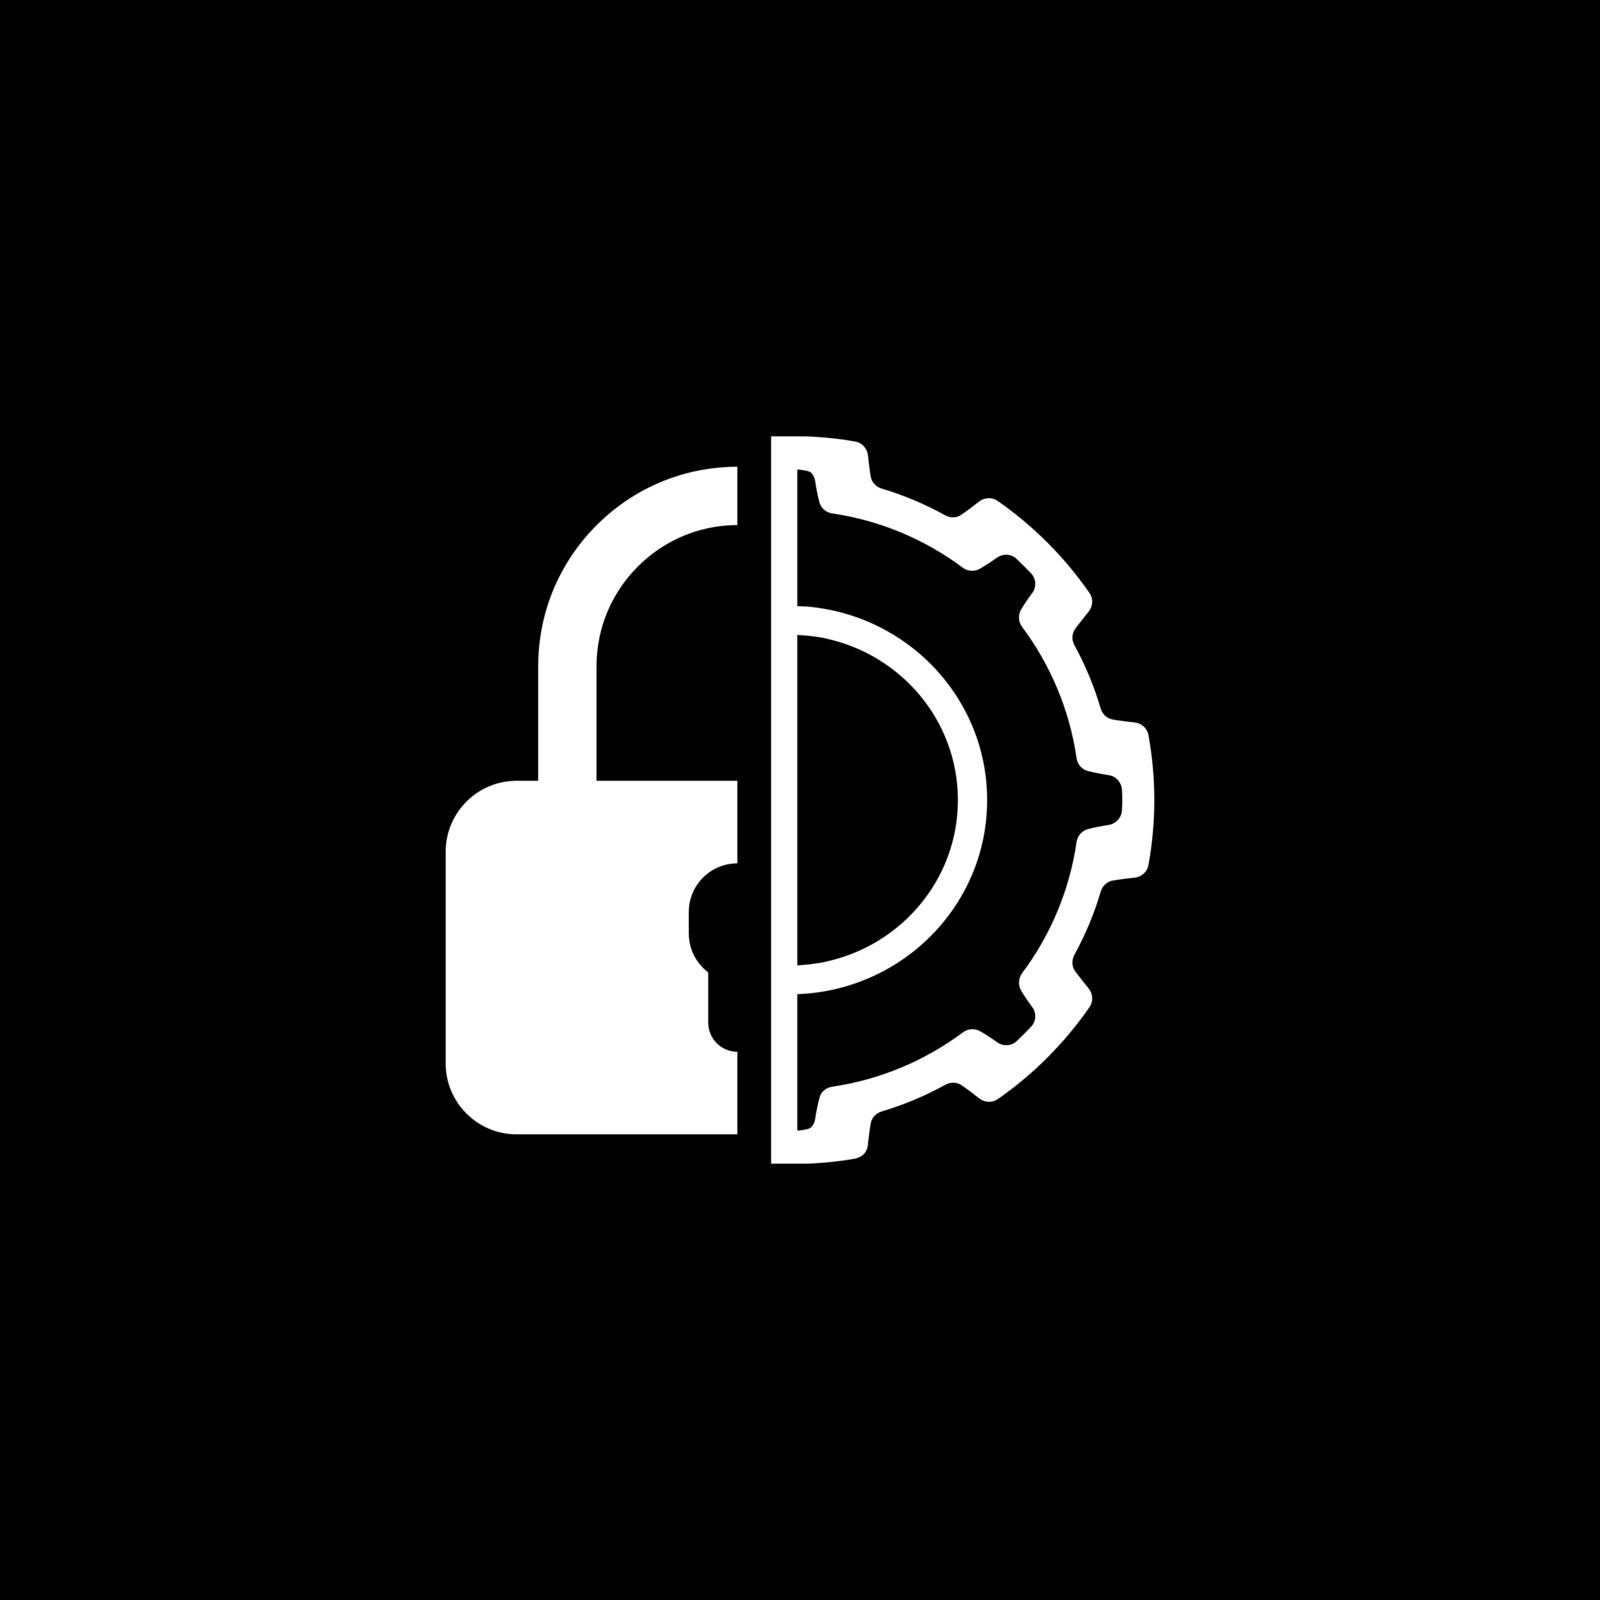 Security Settings Icon. Flat Design. Business Concept Isolated Illustration.